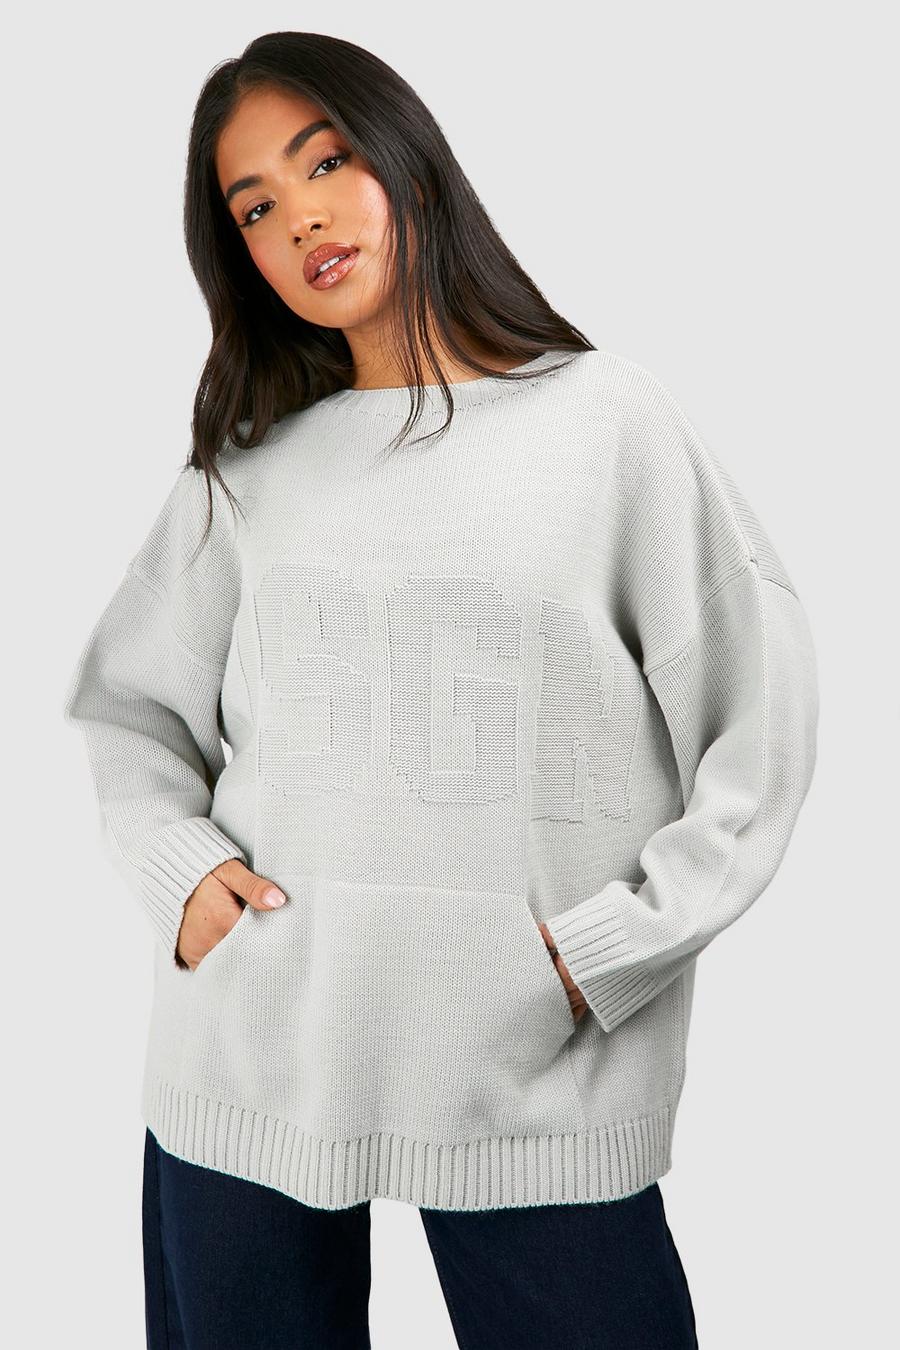 Silver Dsgn Embossed Knitted Jumper